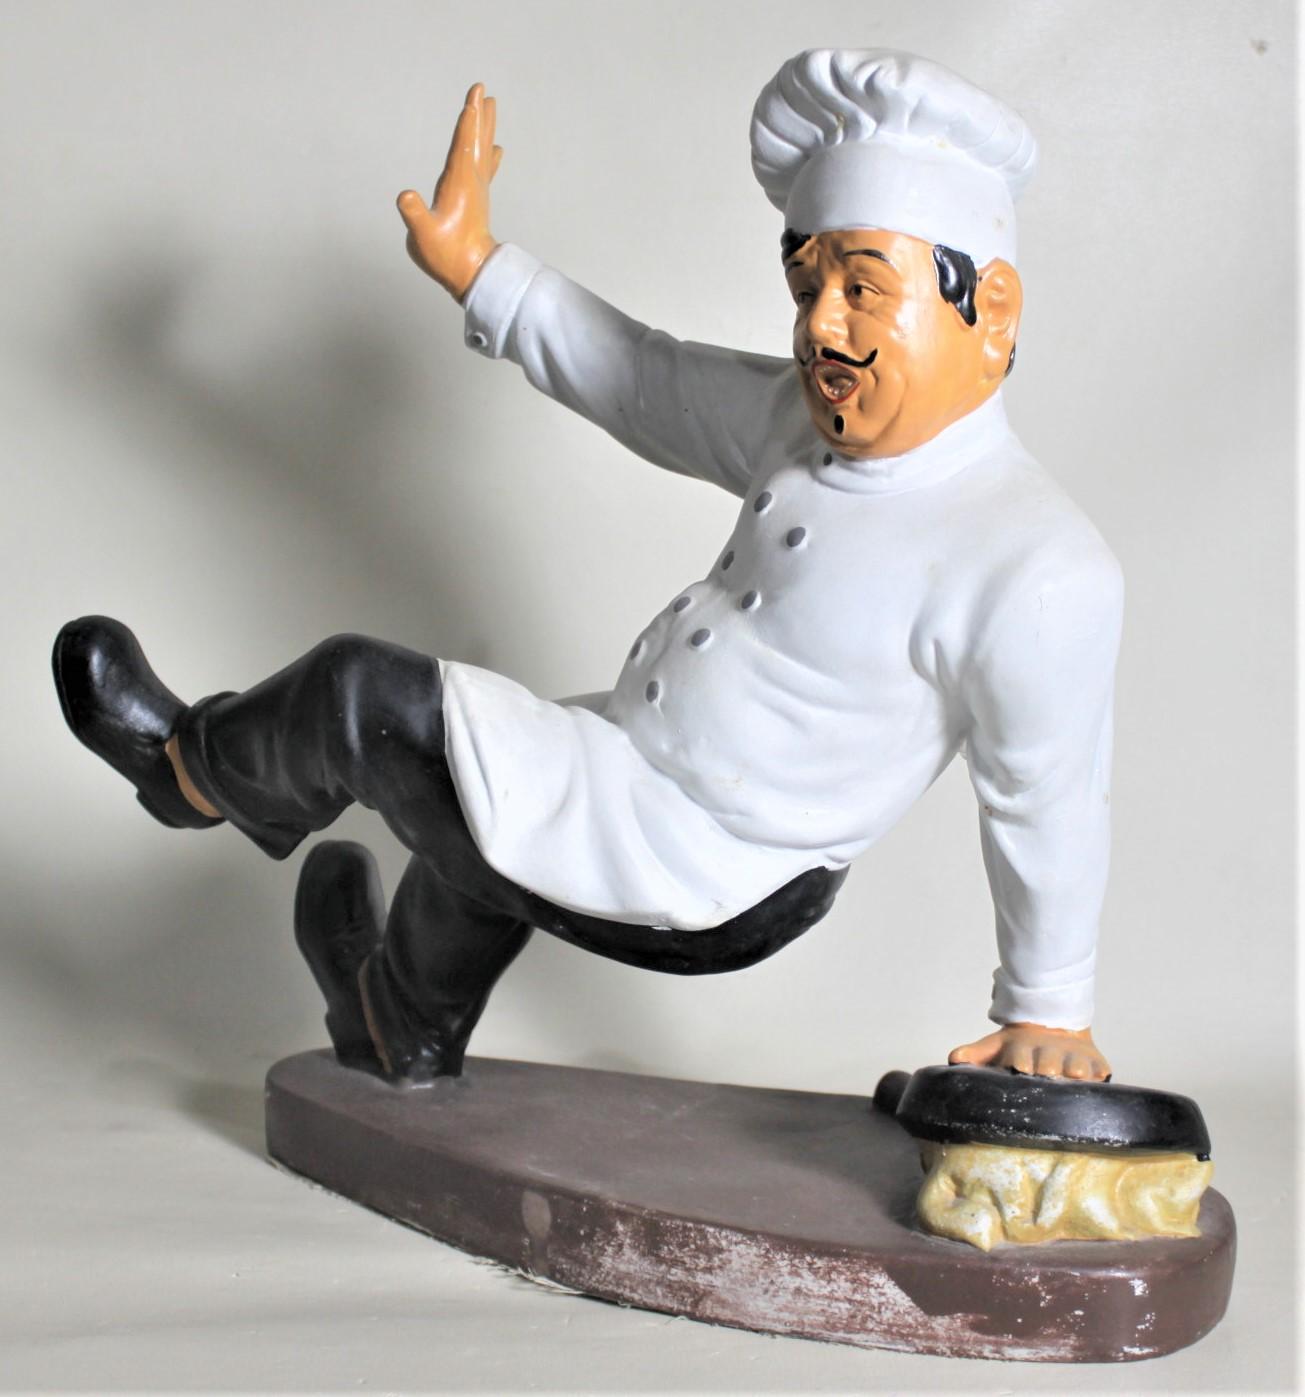 American Vintage Whimsical Chalkware French or Italian Falling Chef Figurine or Sculpture For Sale